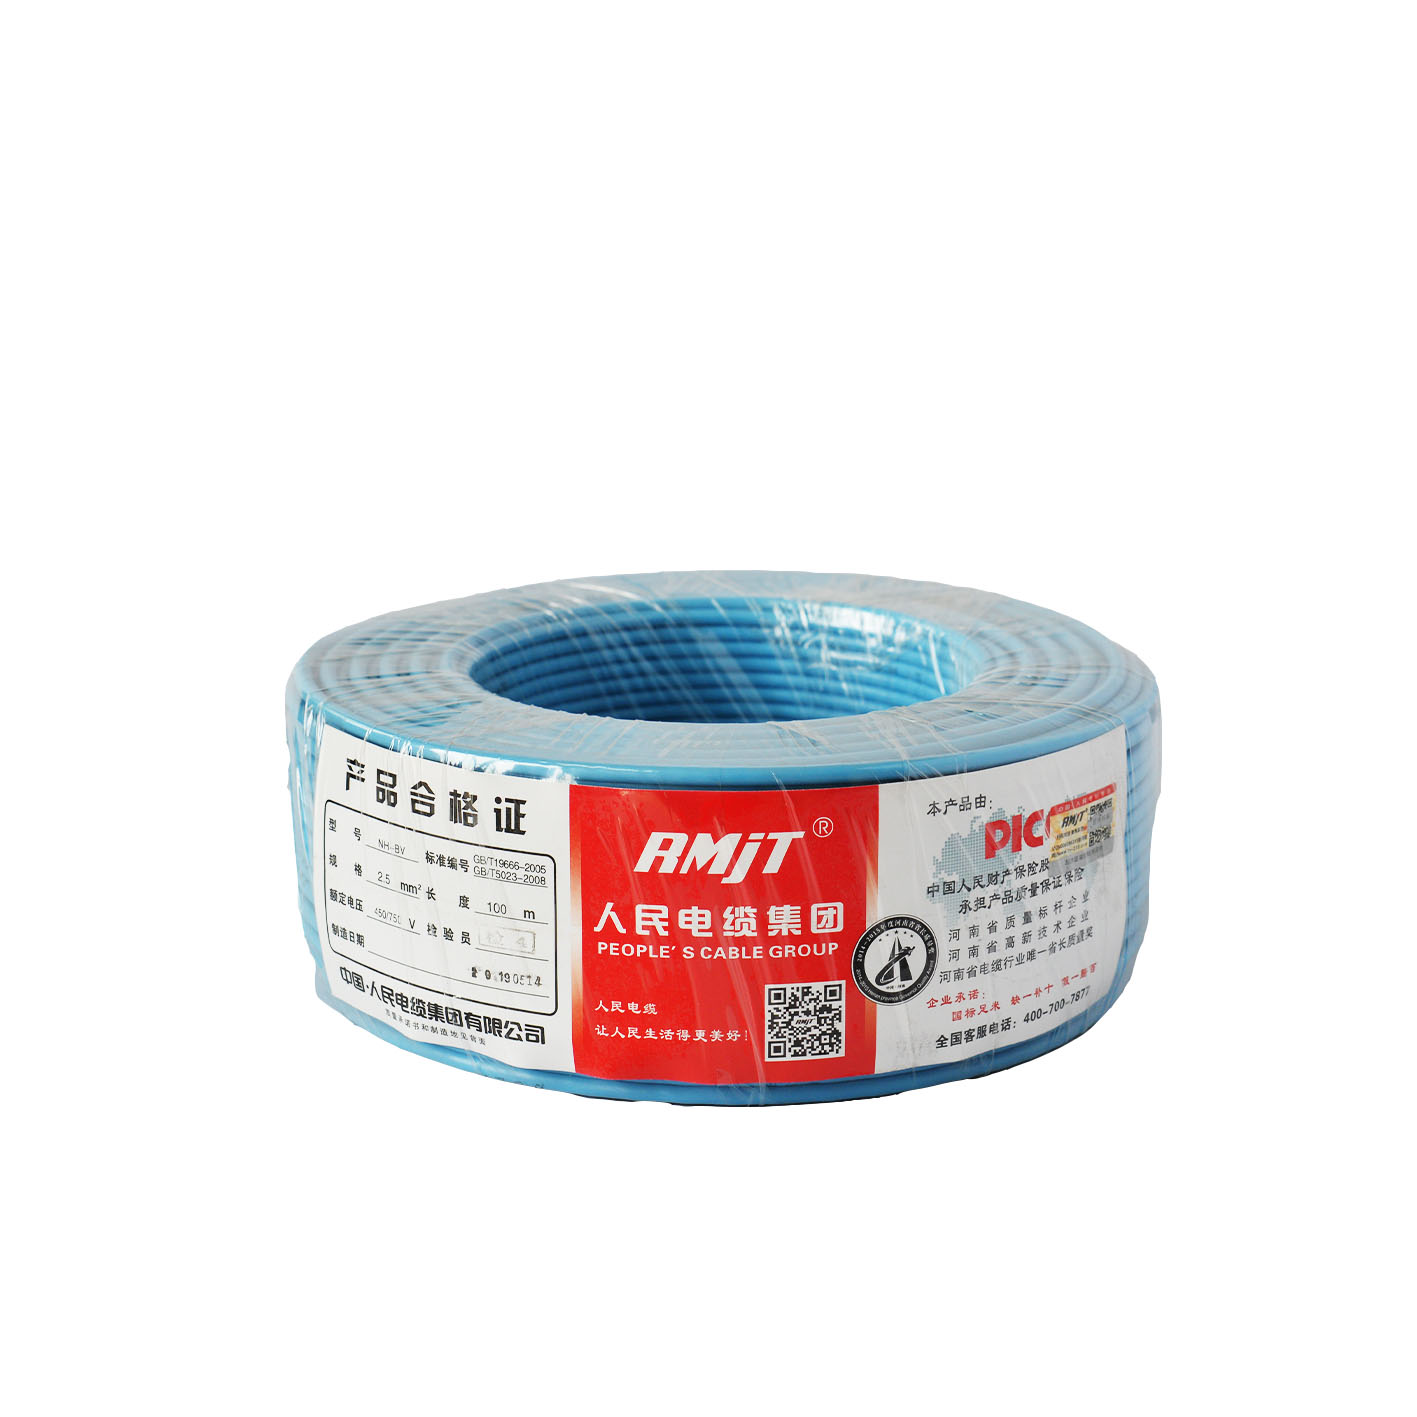 450/750V Copper Conductor PVC insulated Electrical Building Wire